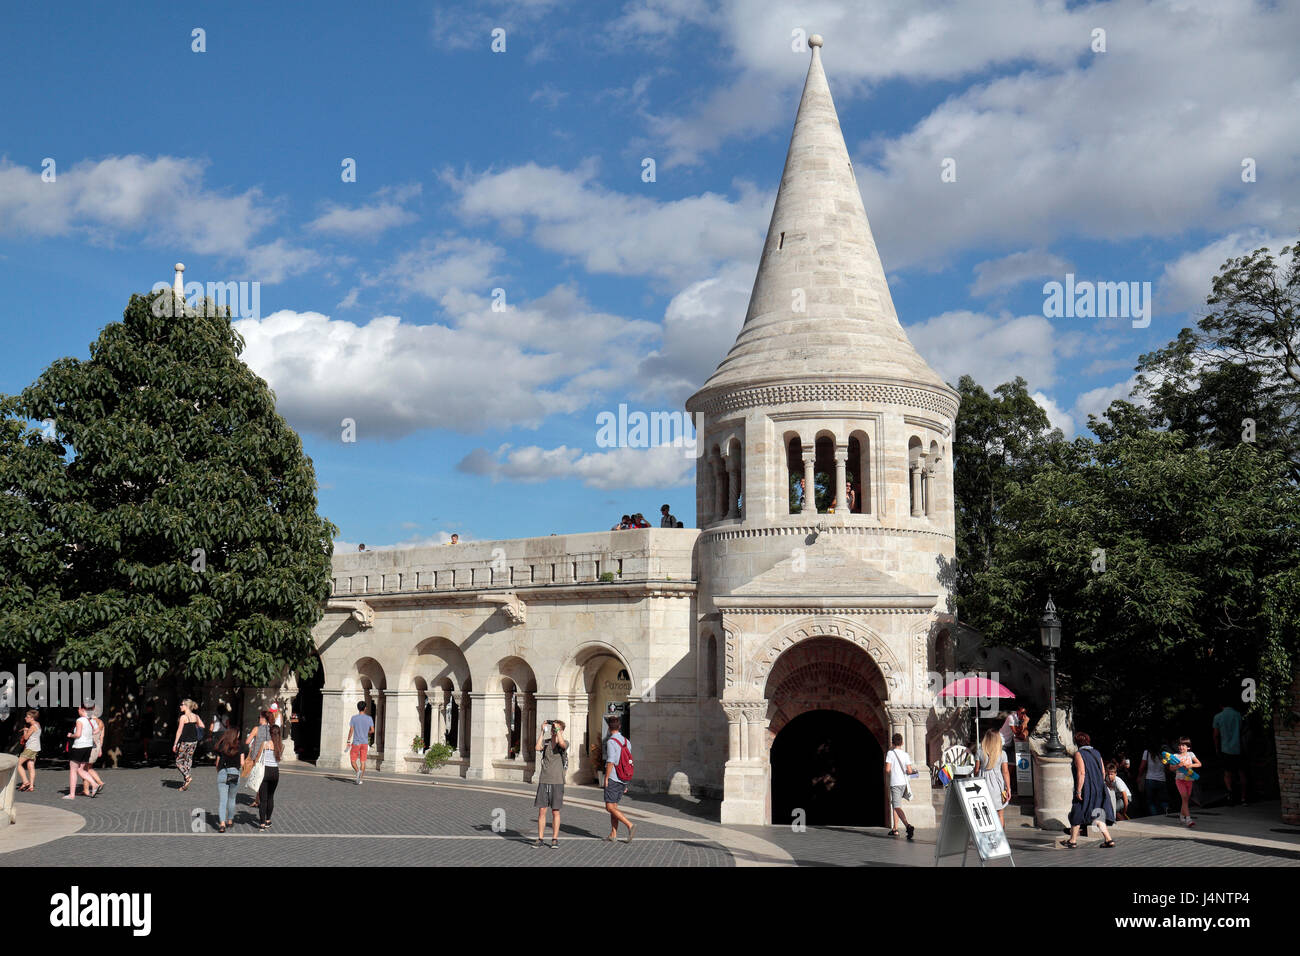 Part of Fisherman's Bastion (Halászbástya), a terrace in neo-Gothic and neo-Romanesque style, which overlooks the River Danube in Budapest, Hungary. Stock Photo